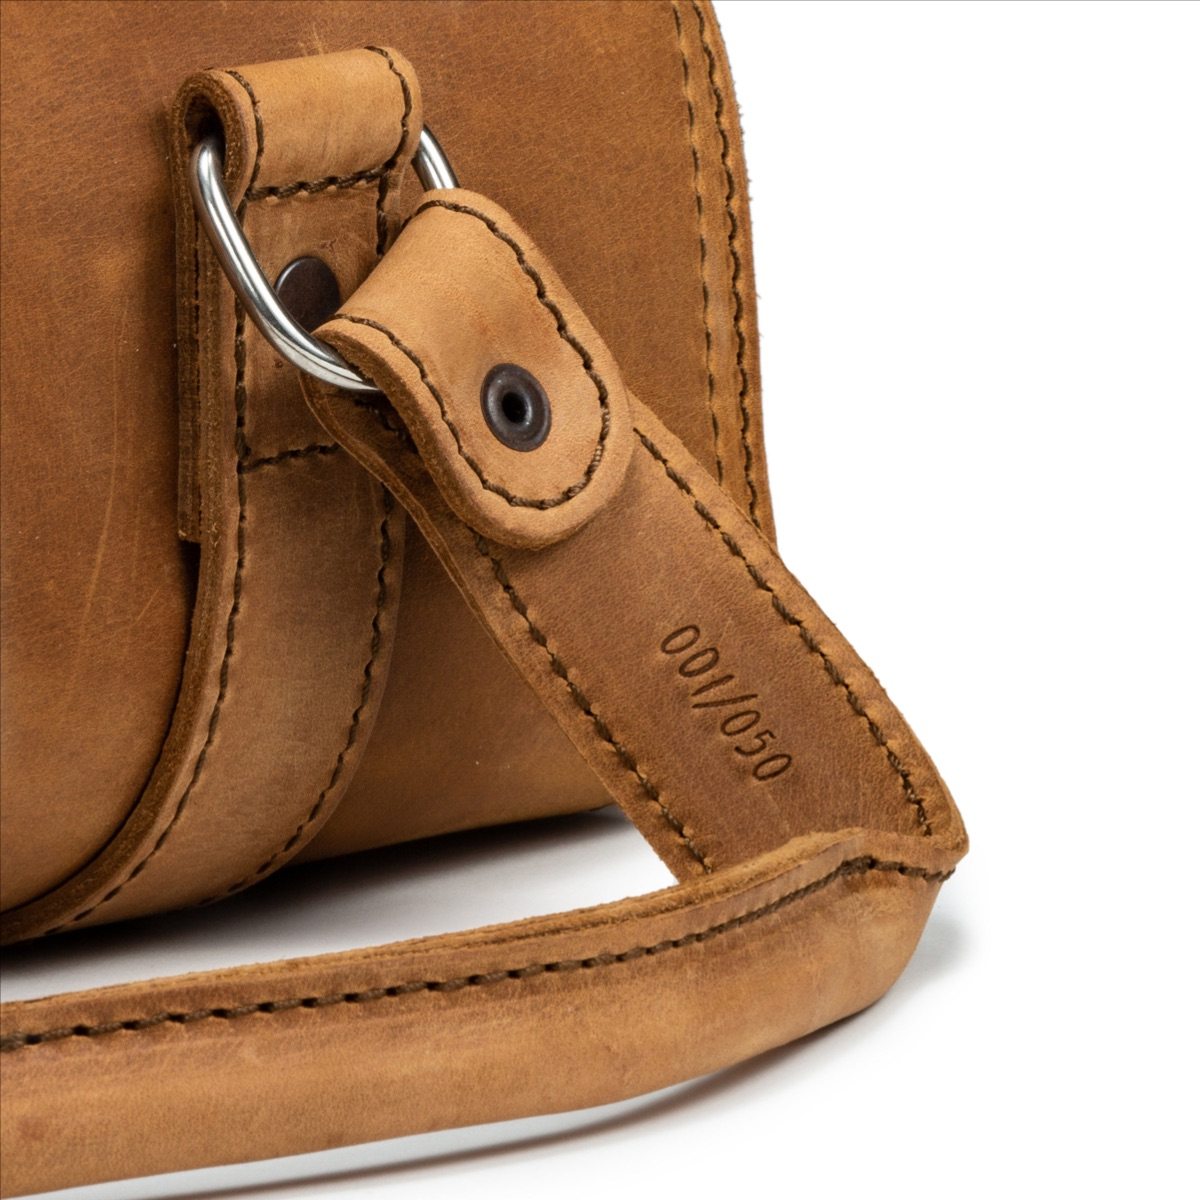 Numbered Cool Tool Bag Launch Today - Saddleback Leather Email Archive